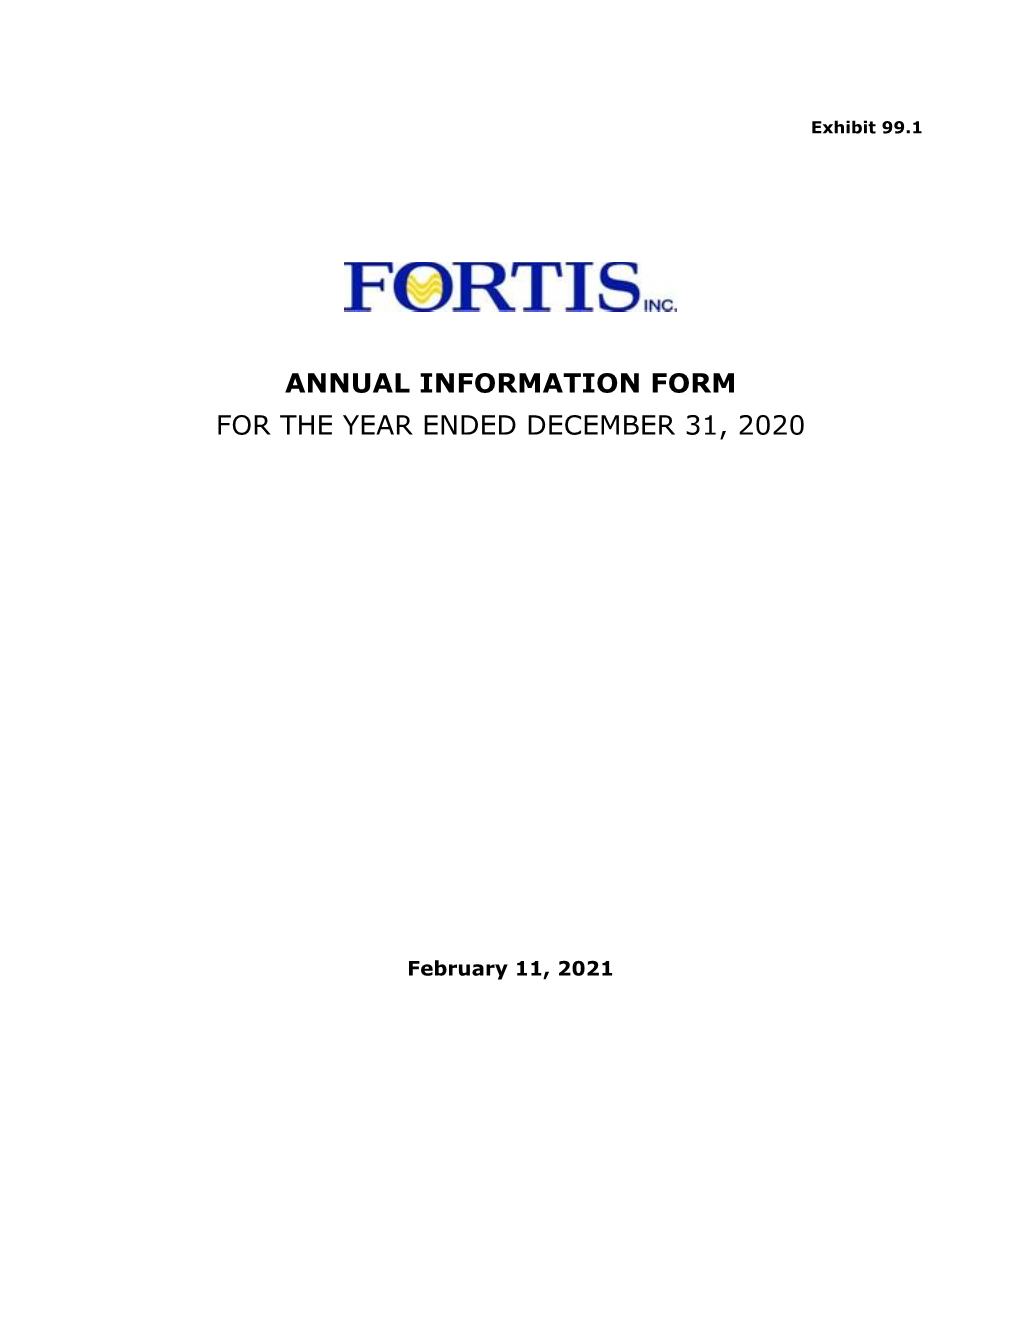 2020 Annual Information Form Are Defined Below